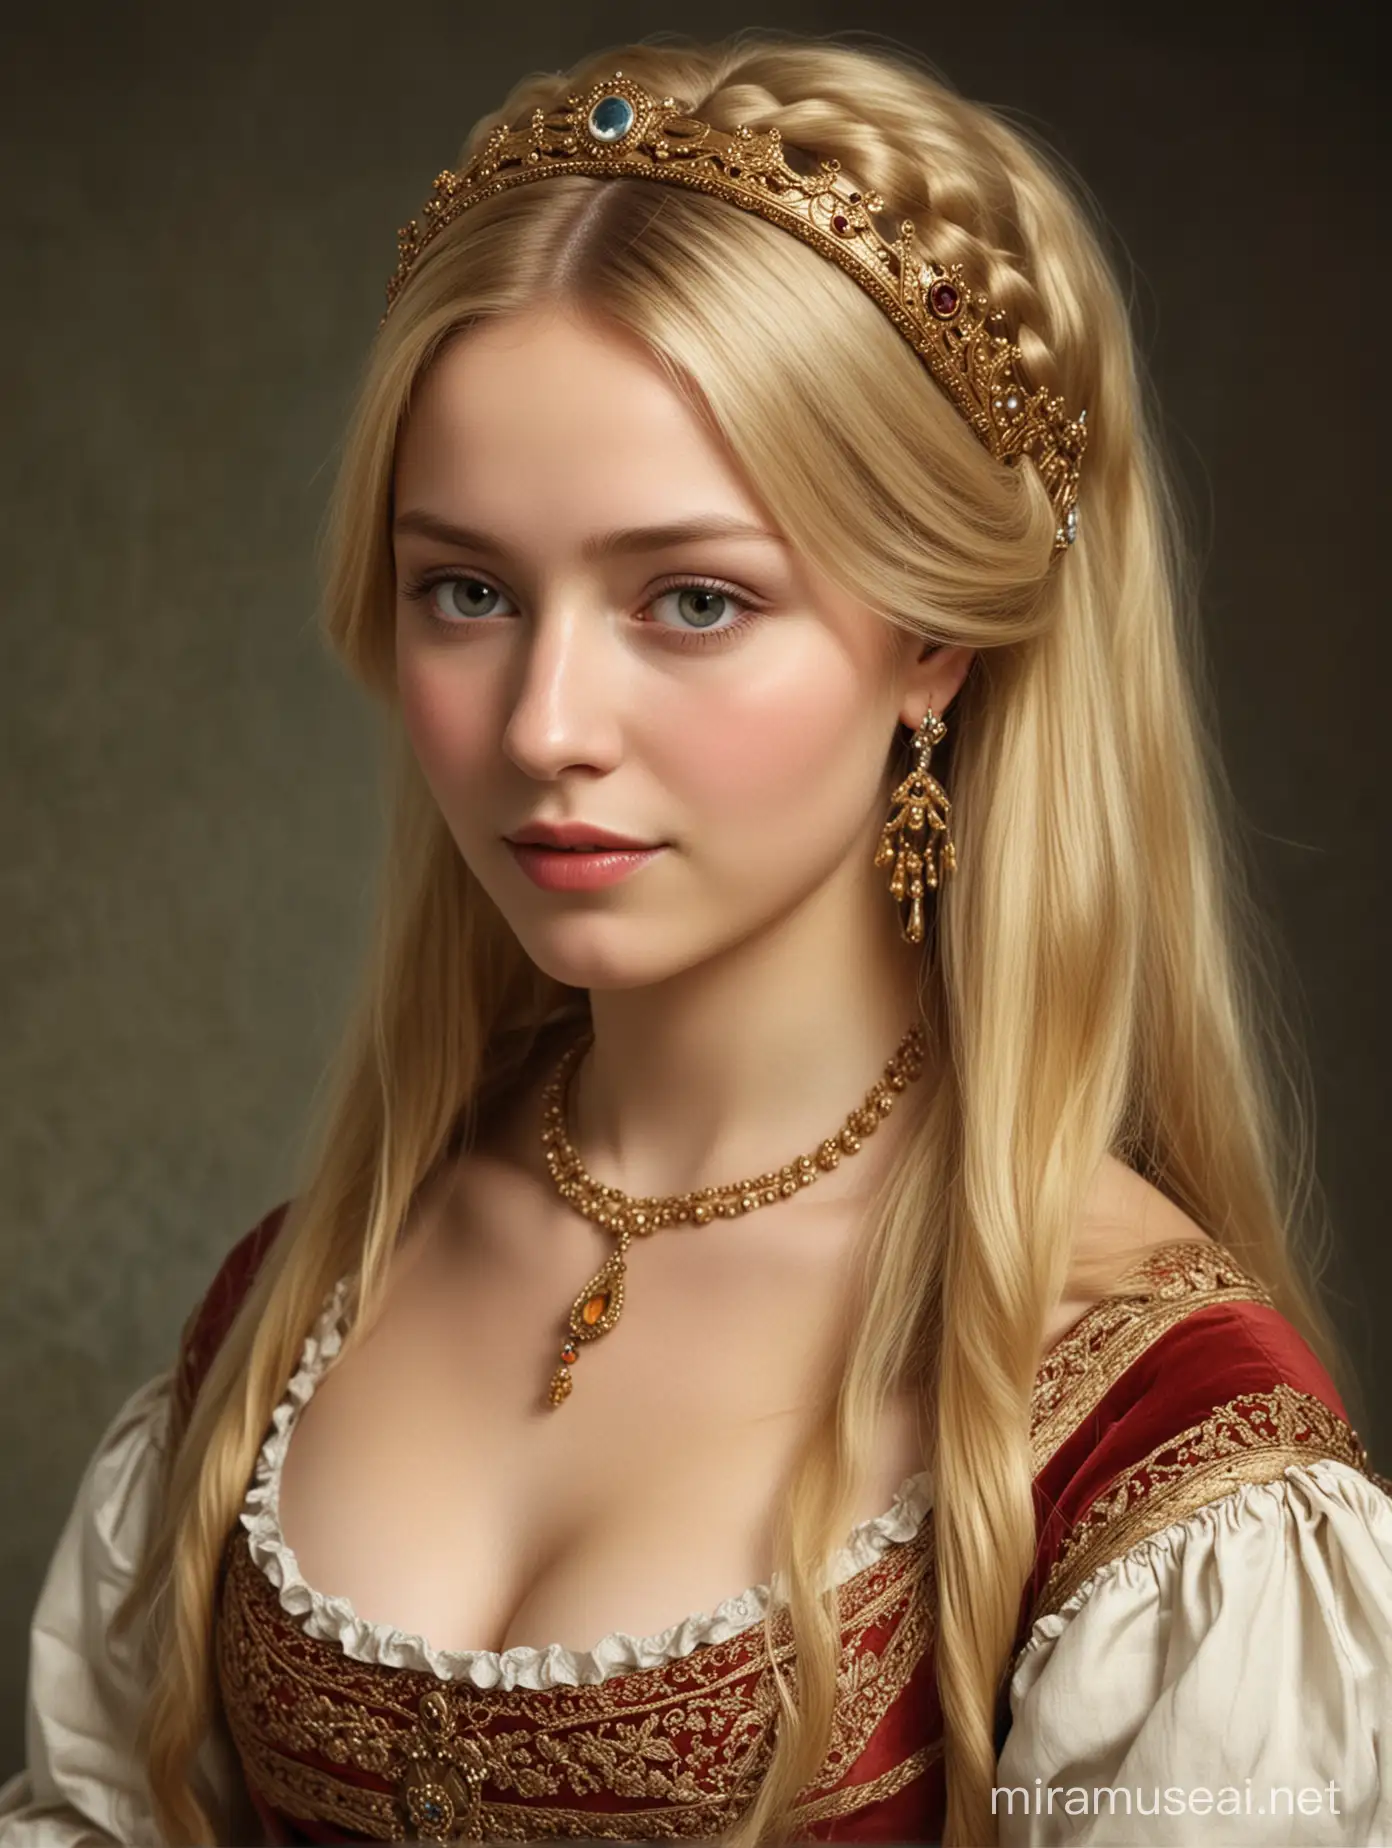 Young Captive Blonde Wife of the King 1850